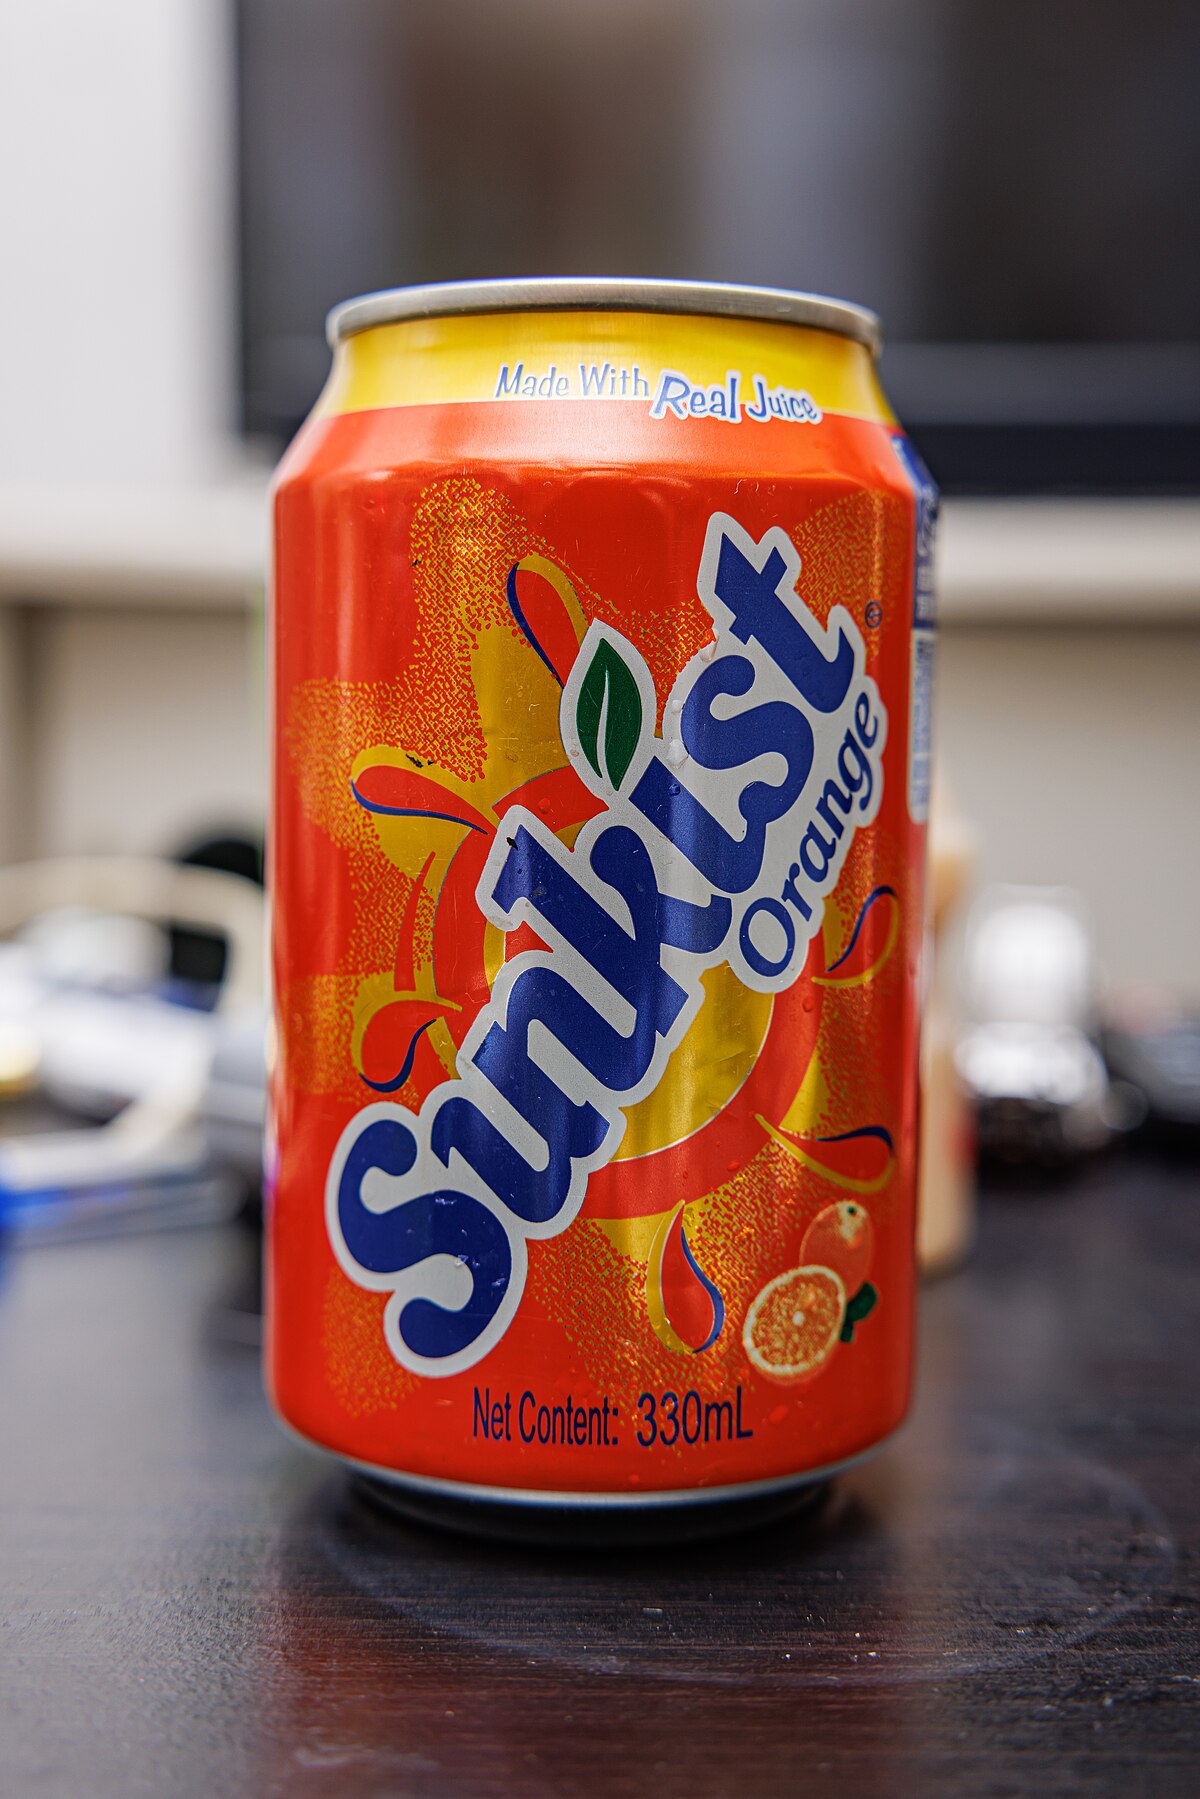 Soft drink brands and logos. Logos and brands of worldwide soft